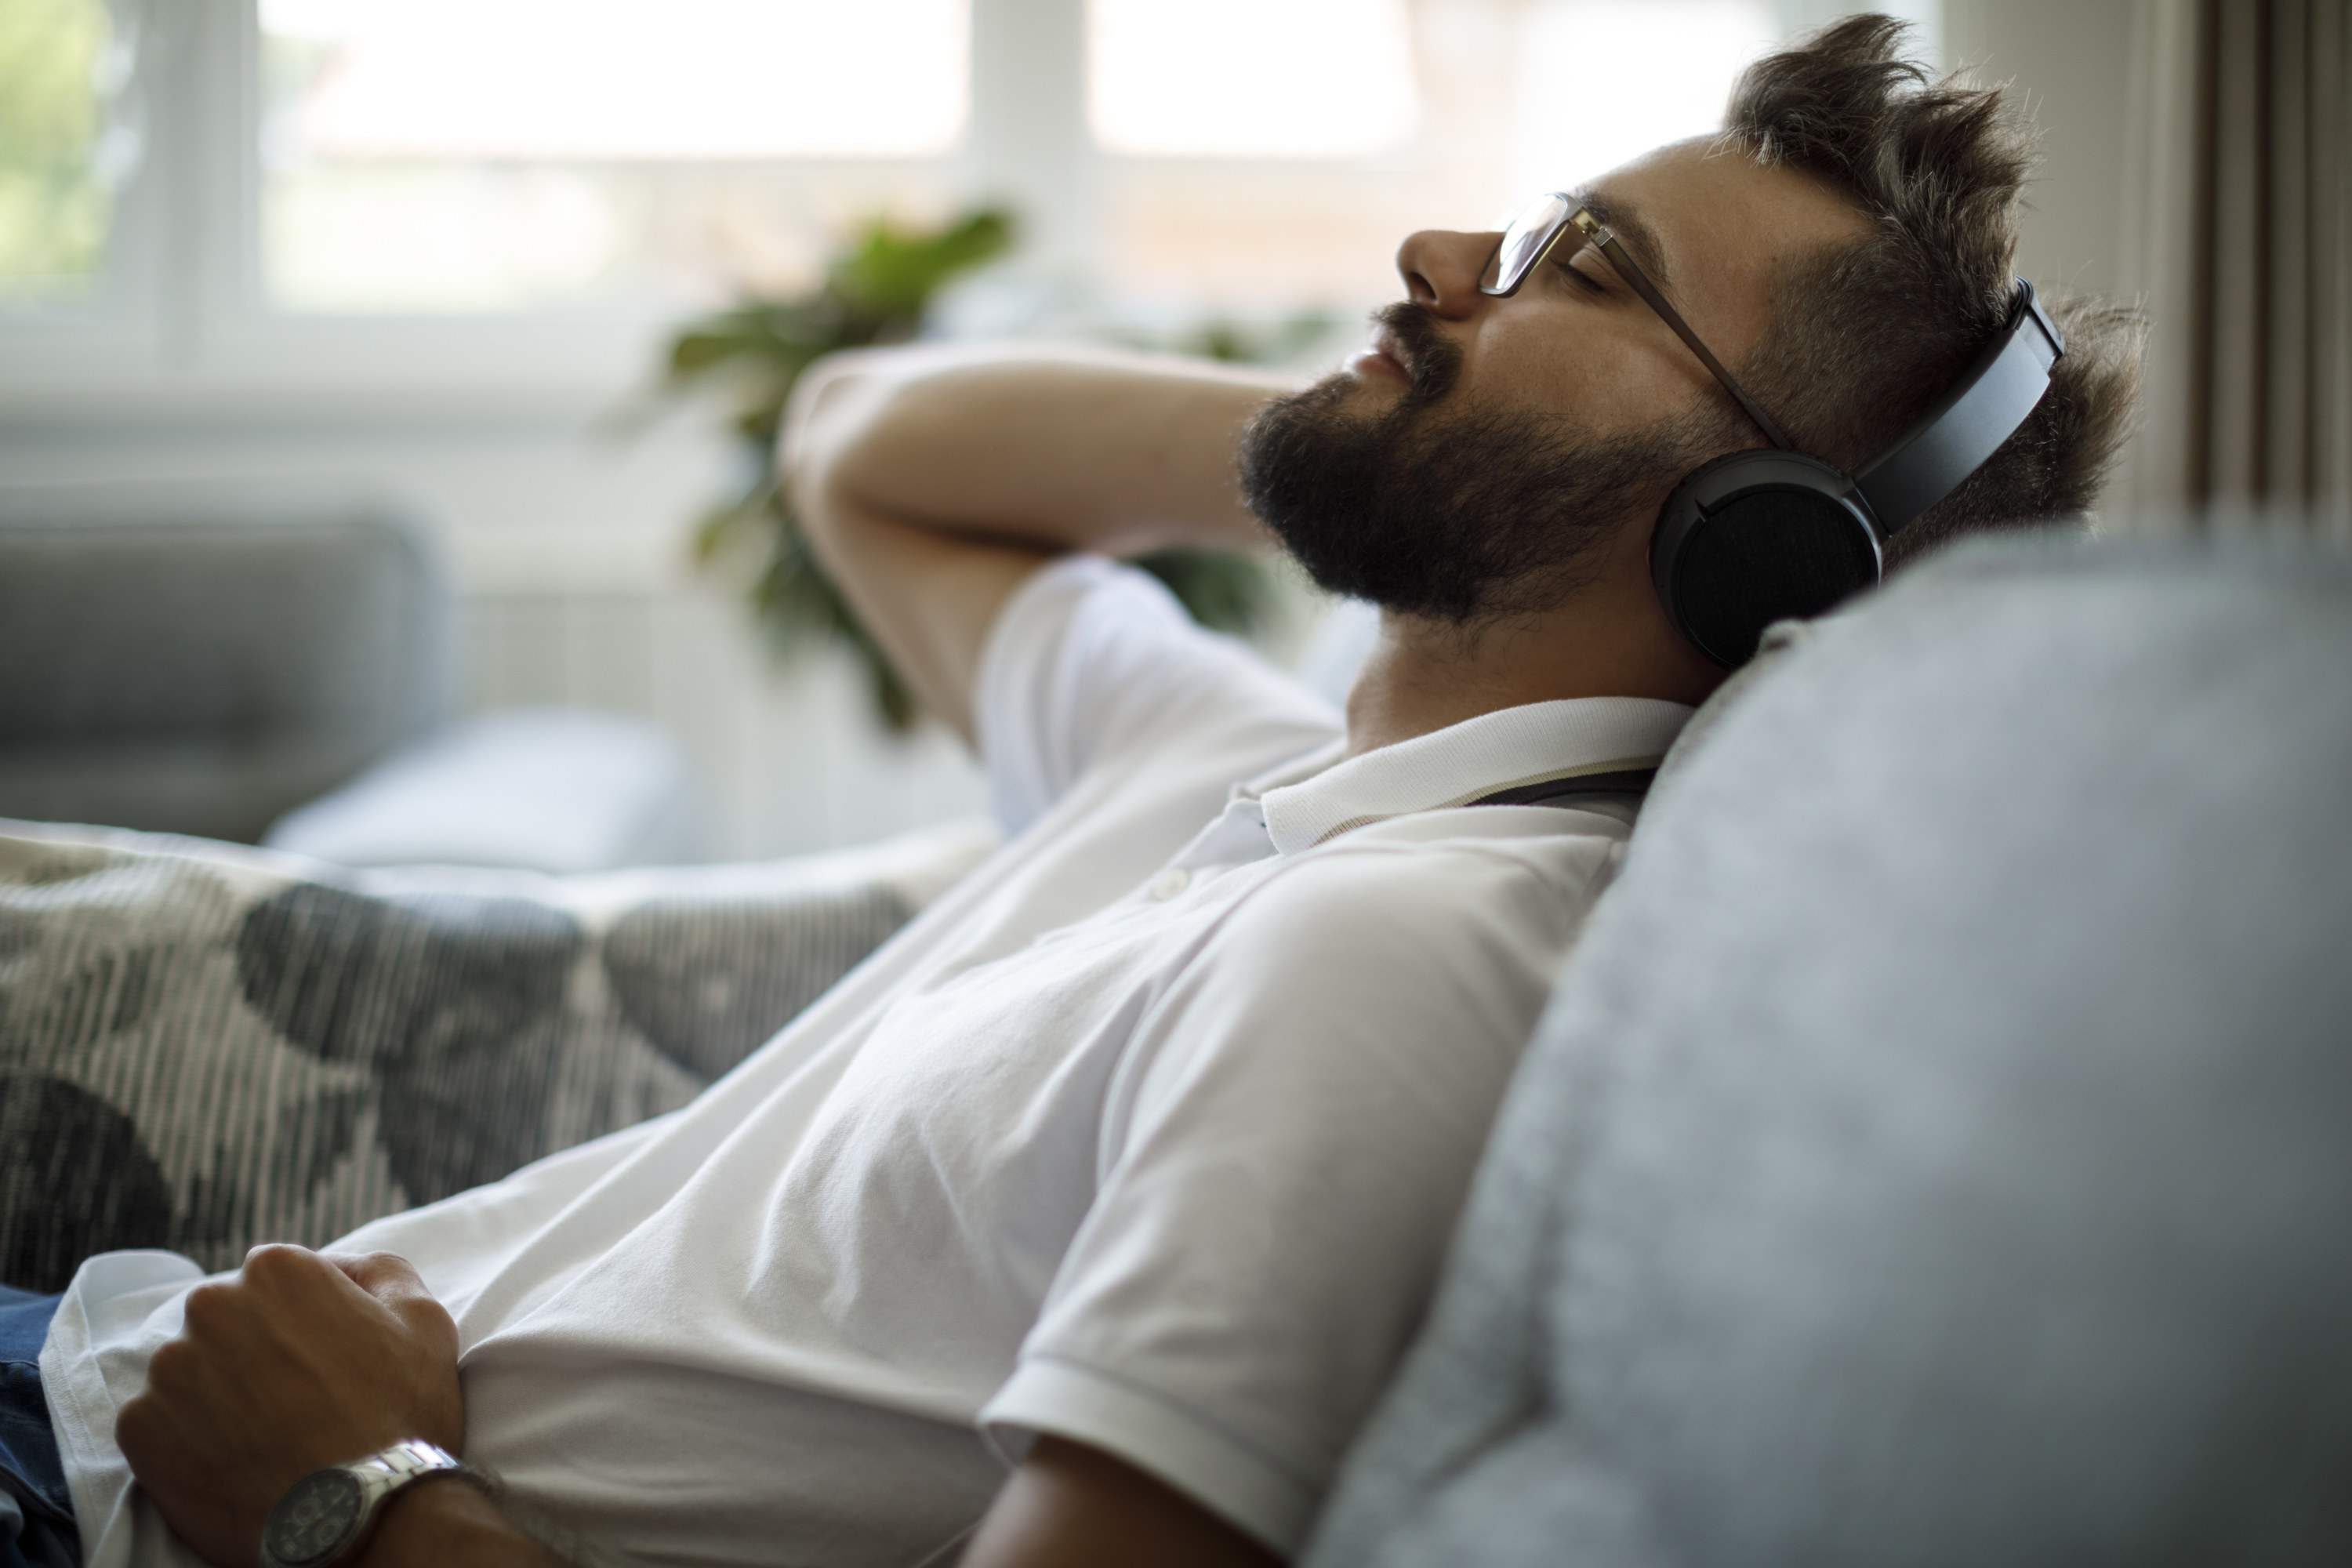 Smiling man with Bluetooth headphones relaxing on a sofa